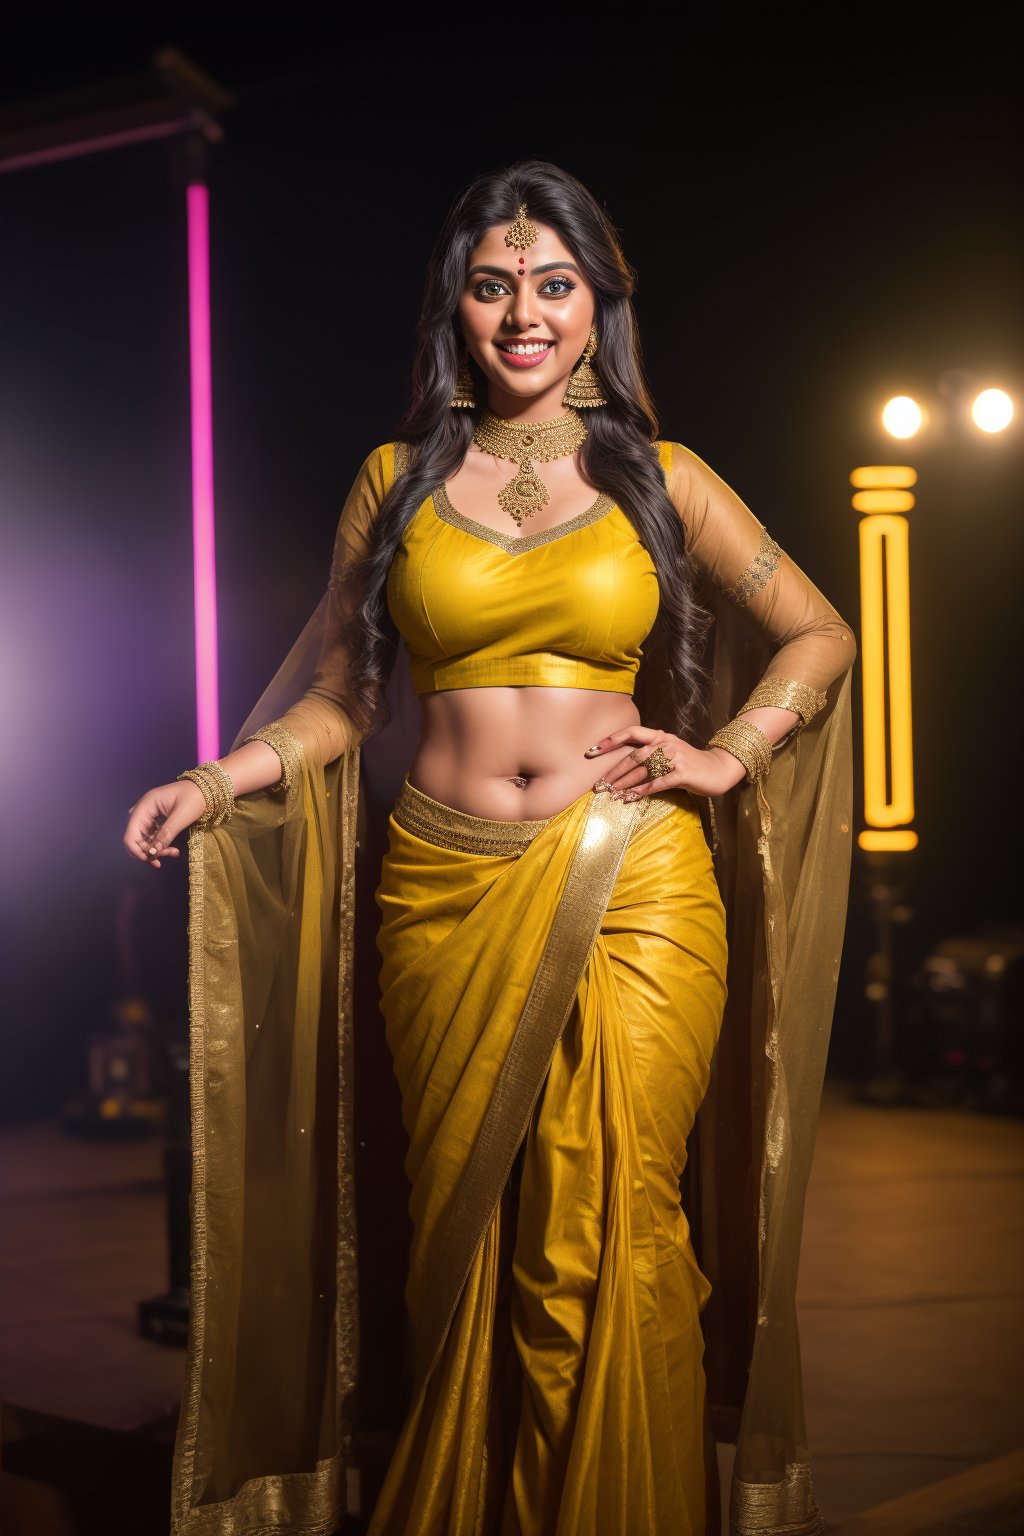 (8K, Raw-Photo, Top Quality, ​masterpiece: 1.1),hyper detailed, 1girl, yound beautiful Indian girl, Indian white face without makeup, film, photography realism, smooth skin, ultra hd, 25 year old,proper breasts ,pretty face, attractive body shape, realistic ,1 girl,yellow pair of flared pants(sharara)_dress,, looking gorgeous,shot with Canon EOS R5, 85mm lens,full body view , only,stood near drum bands, decorative stage,smiling, one of them is laughing, super realistic,unmarried fashion, different yellow indian  sharara dresses,Big eyes